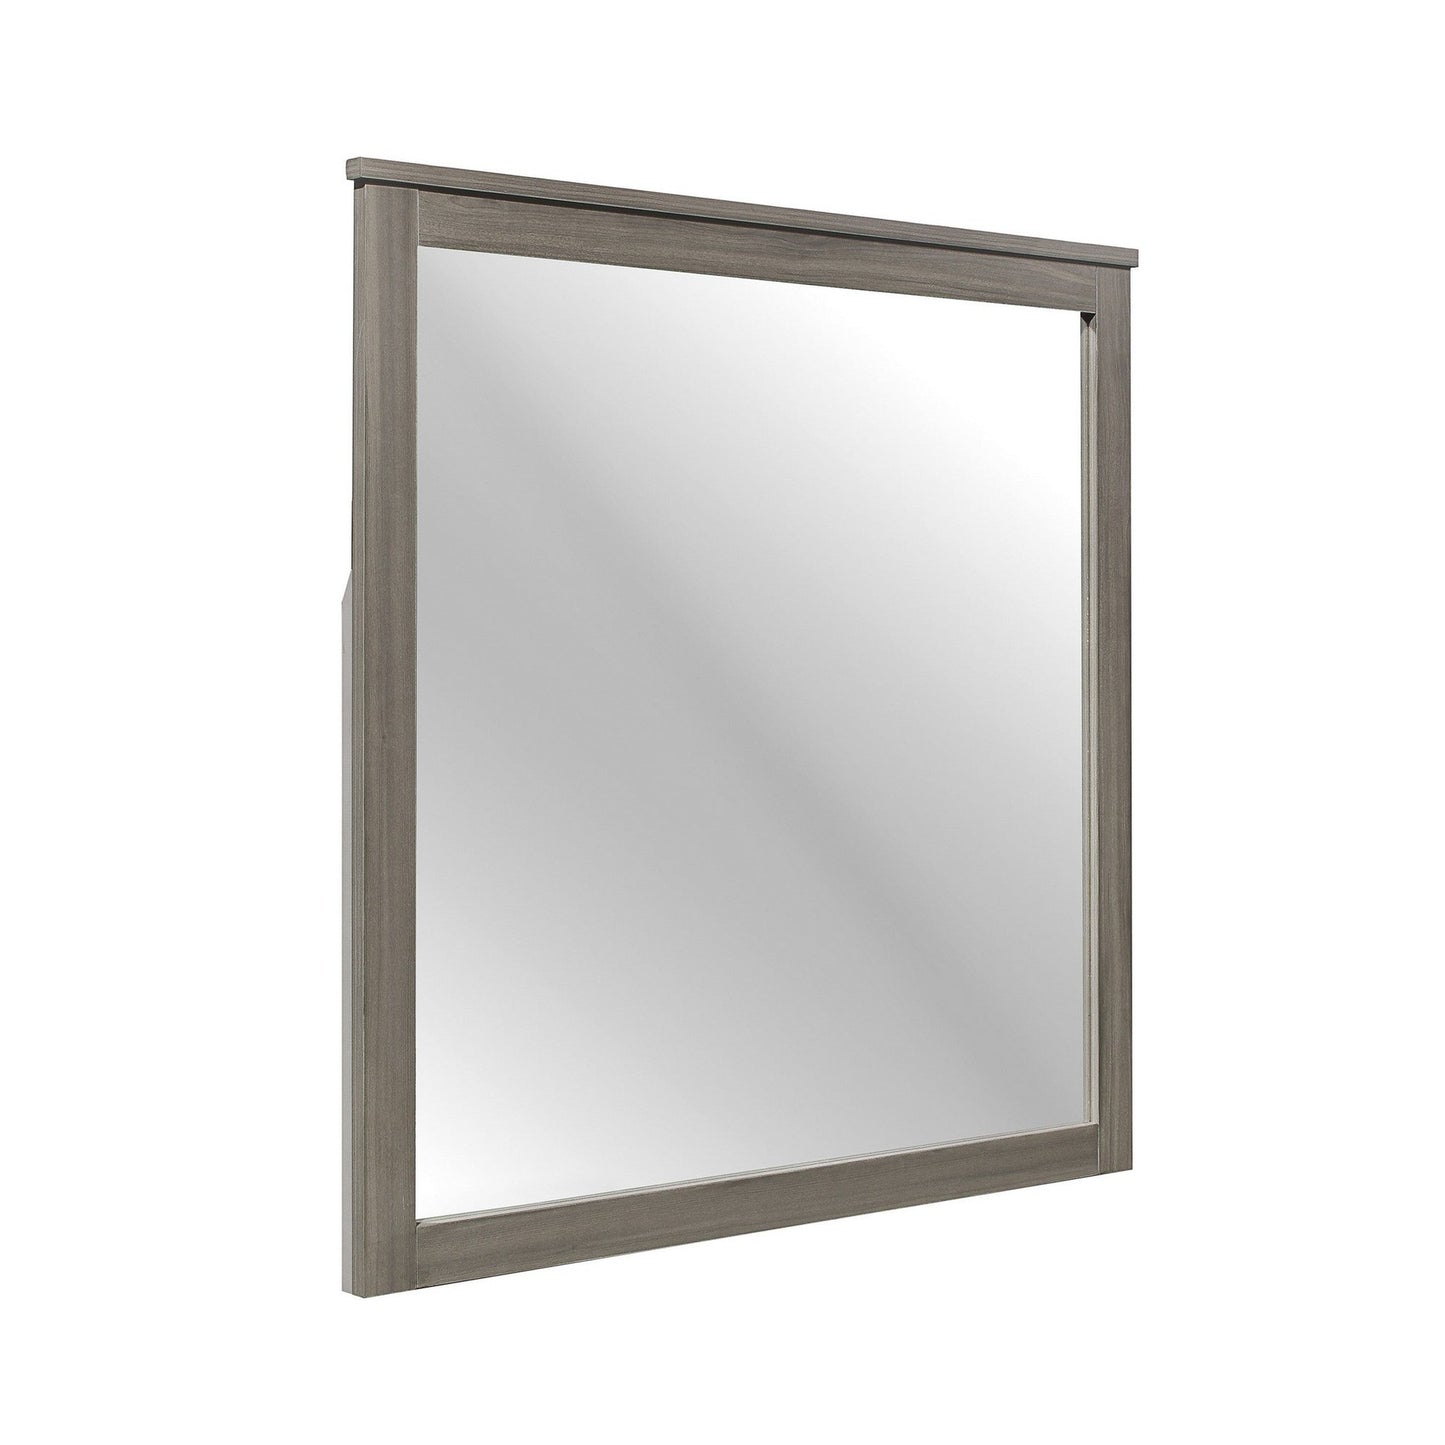 Benzara Dark Gray and Silver Square Wooden Frame Mirror With Grain Details